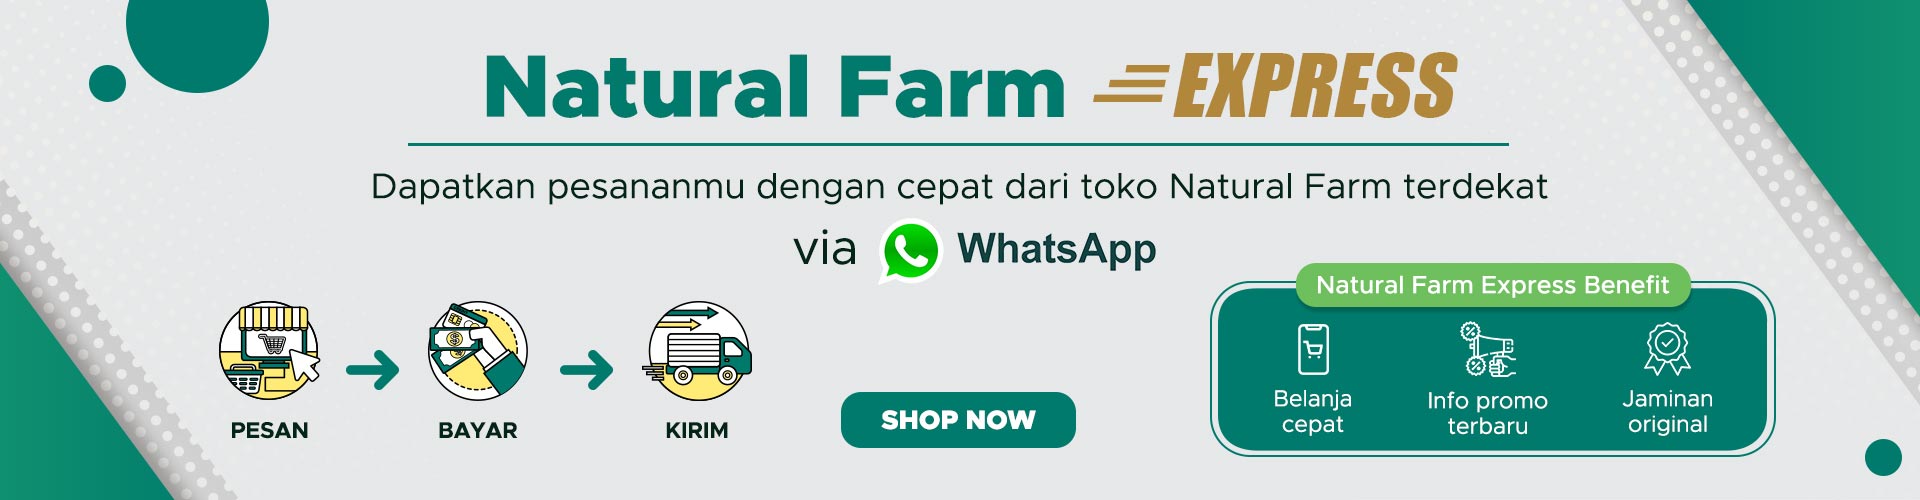 Natural Farm Express & Store Location